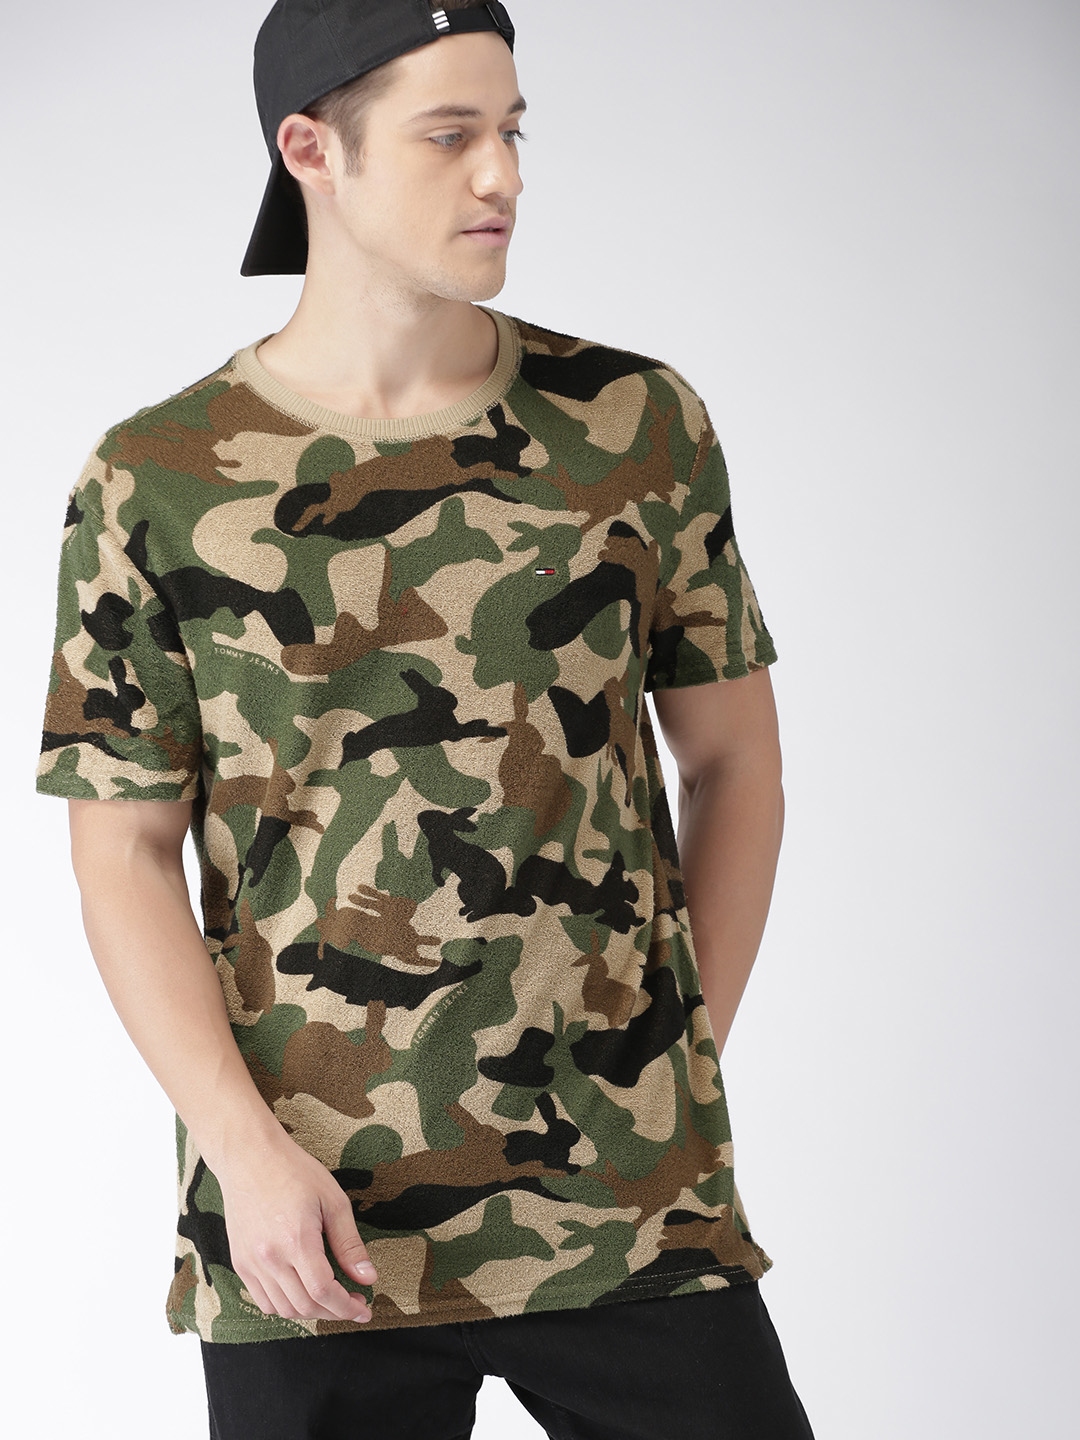 tommy hilfiger camouflage shirt